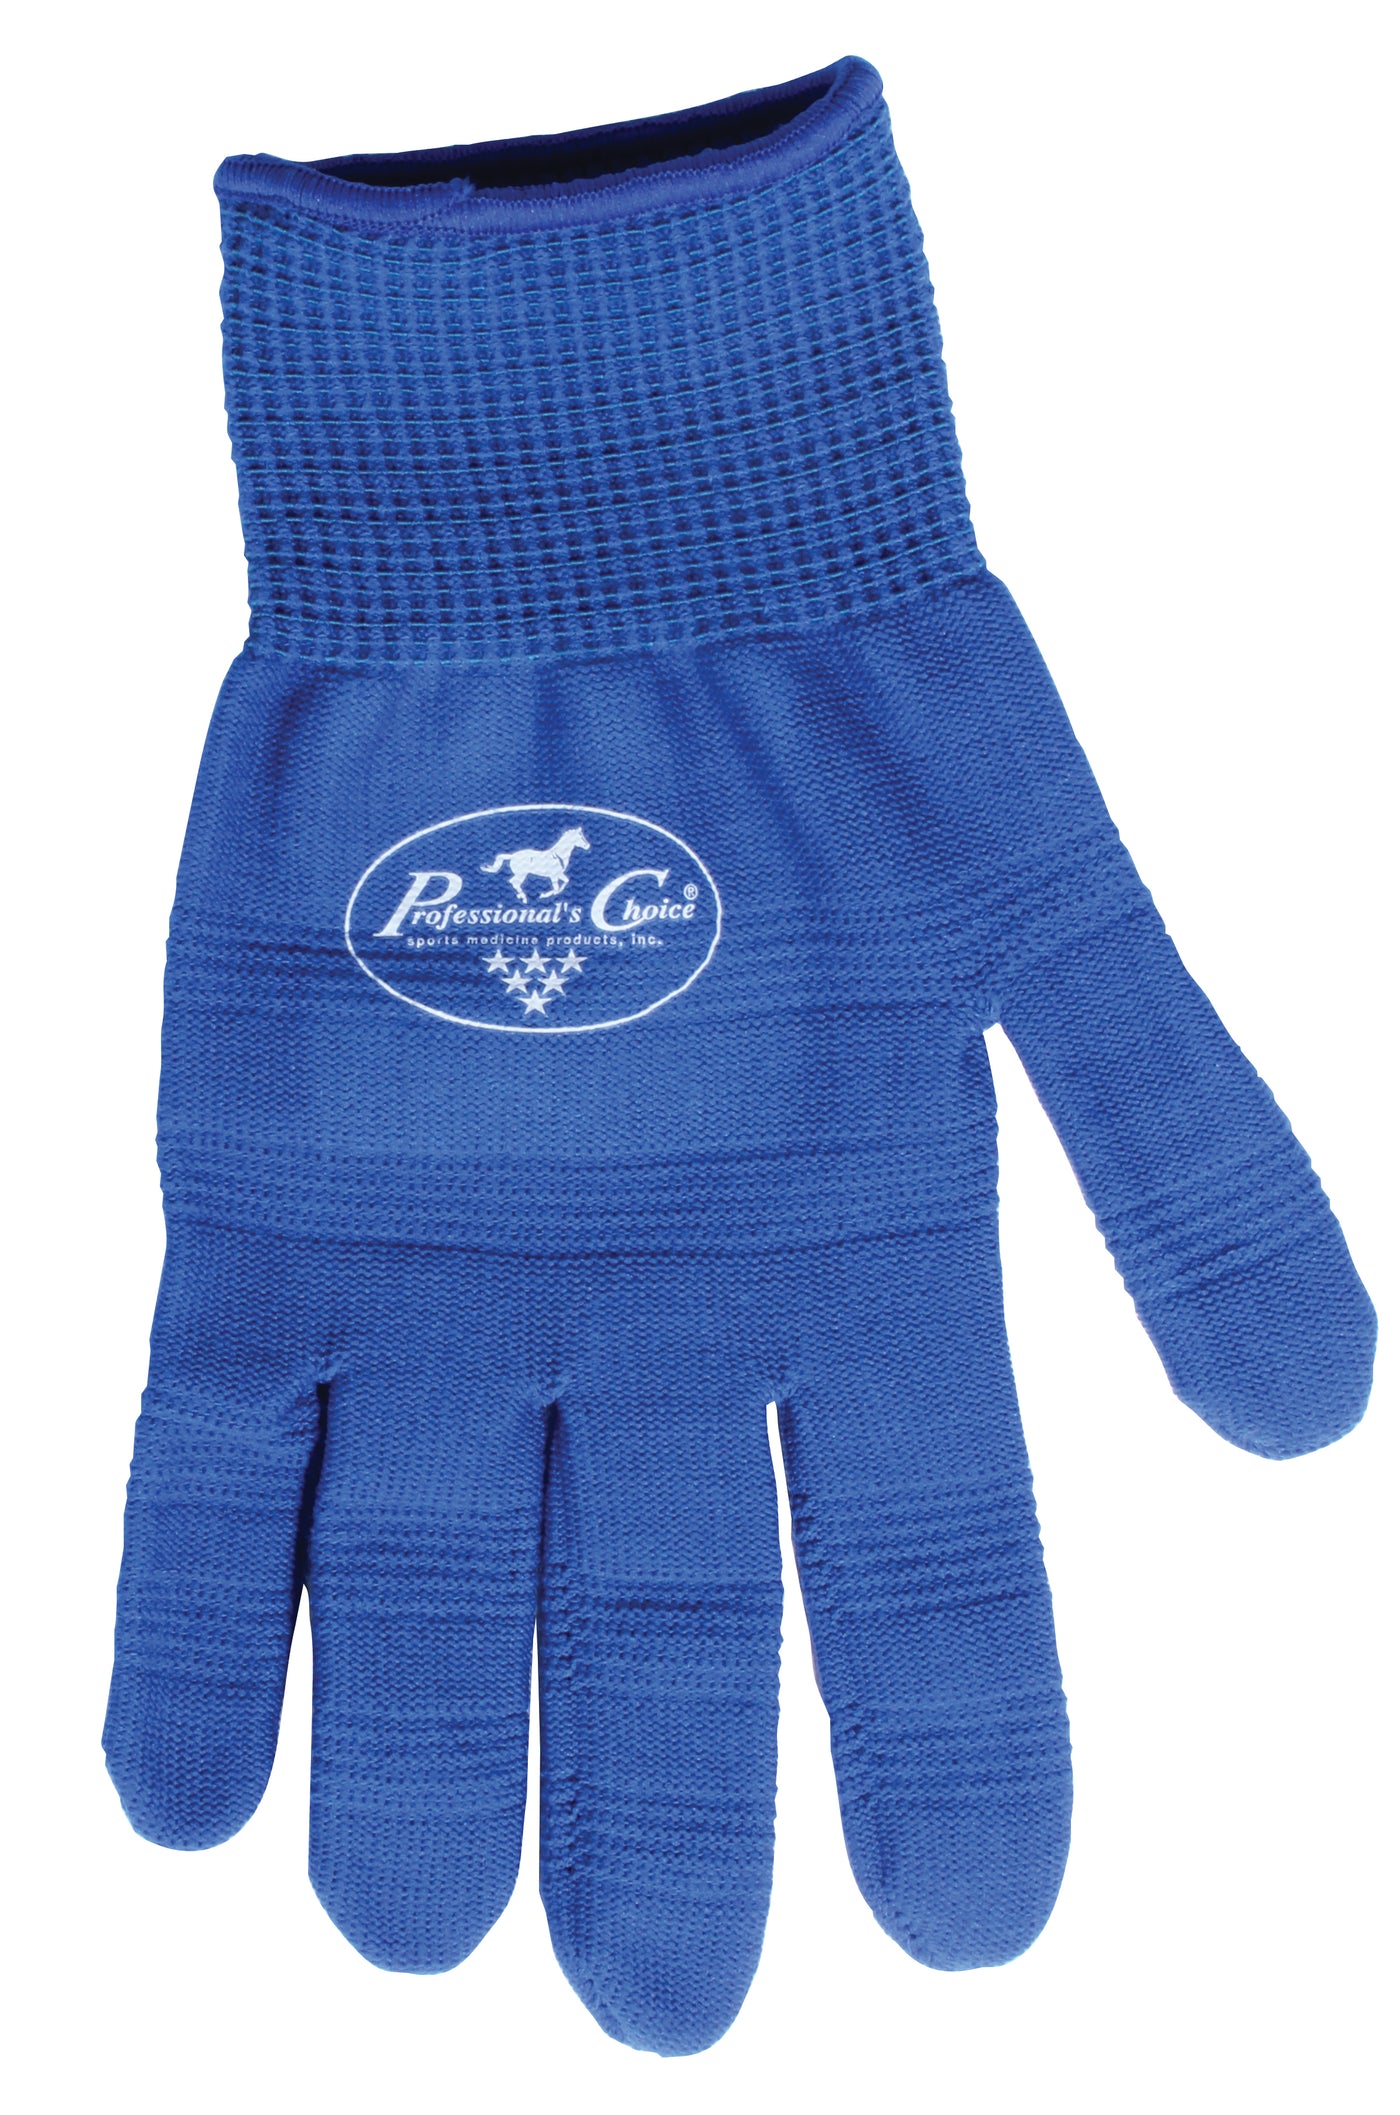 Professional’s Choice Roping Glove PCRG